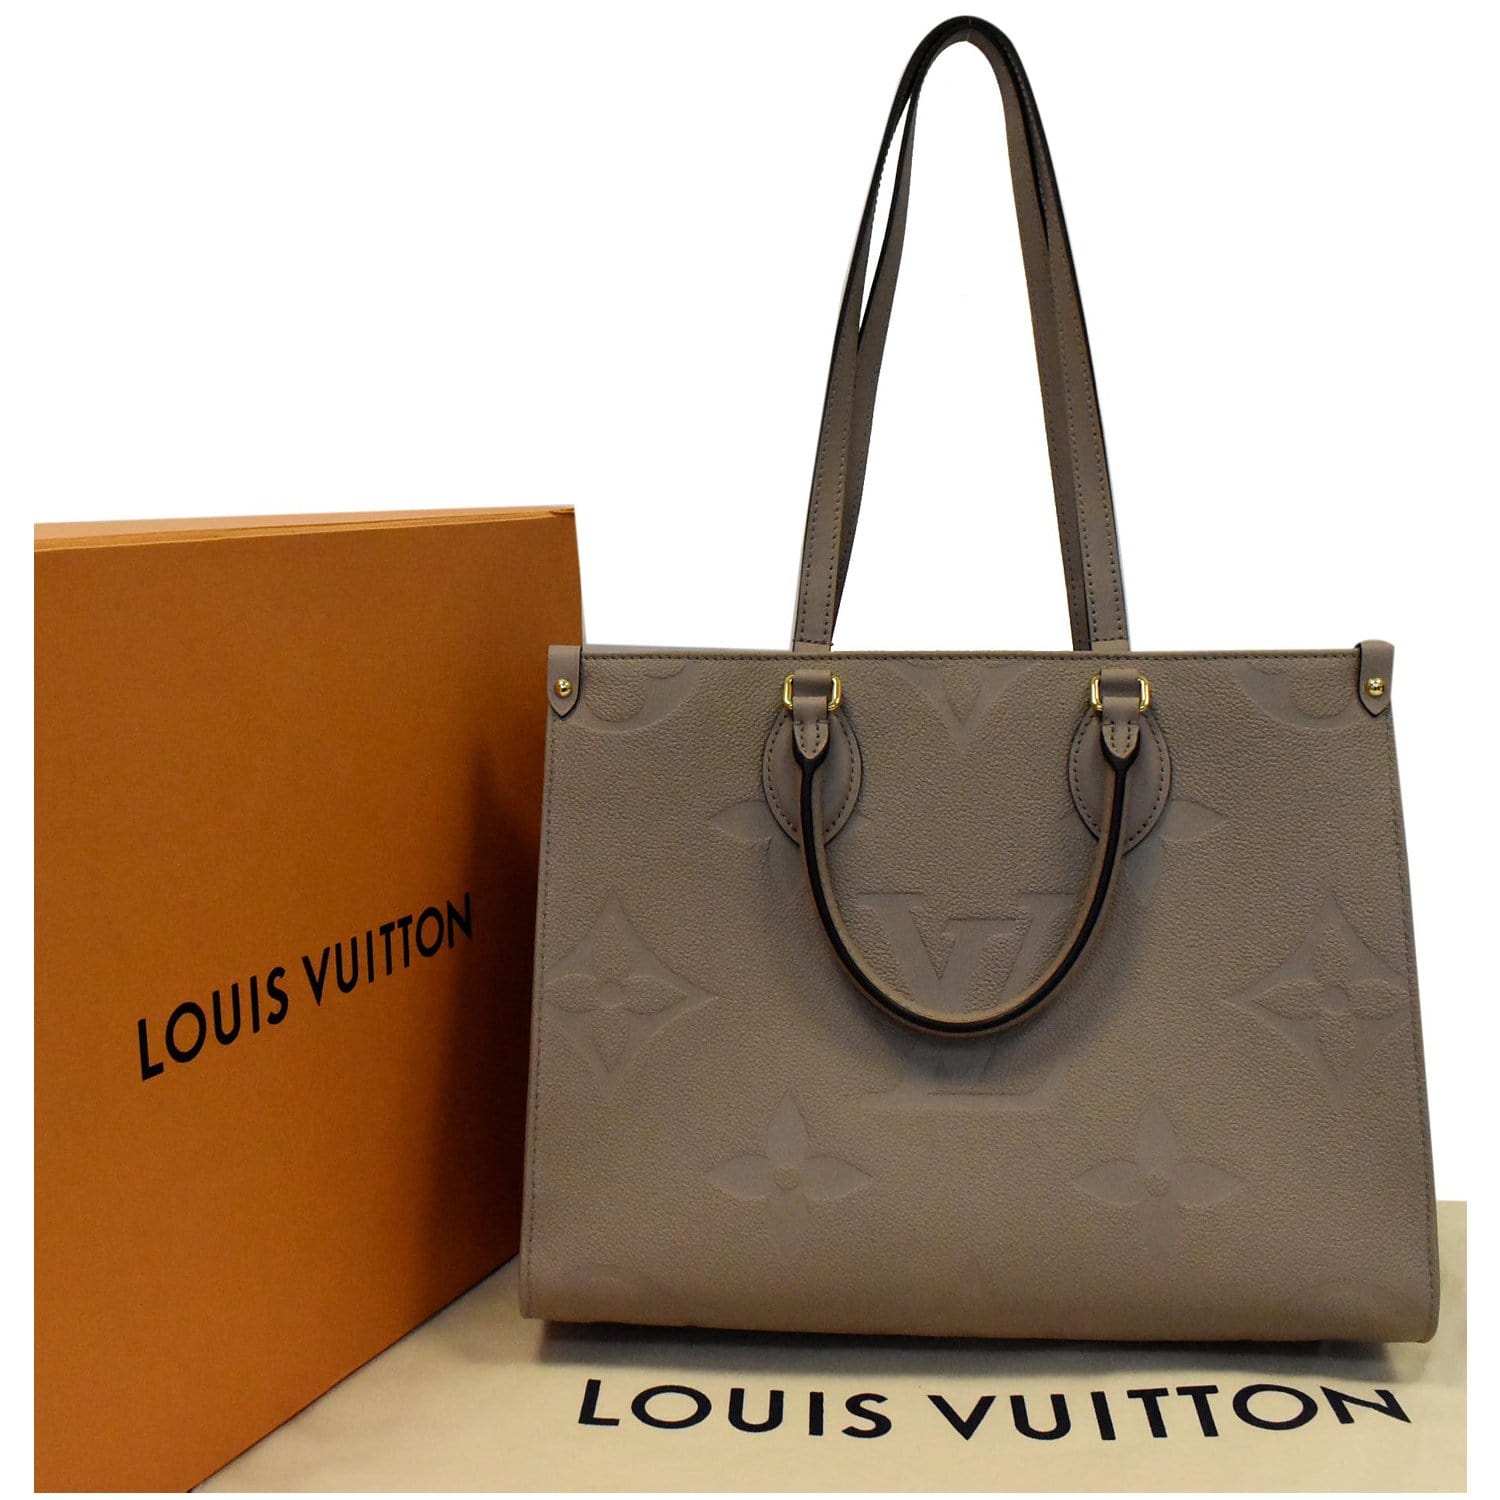 NEW Louis Vuitton Neverfull MM Empreinte Leather (UNBOXING